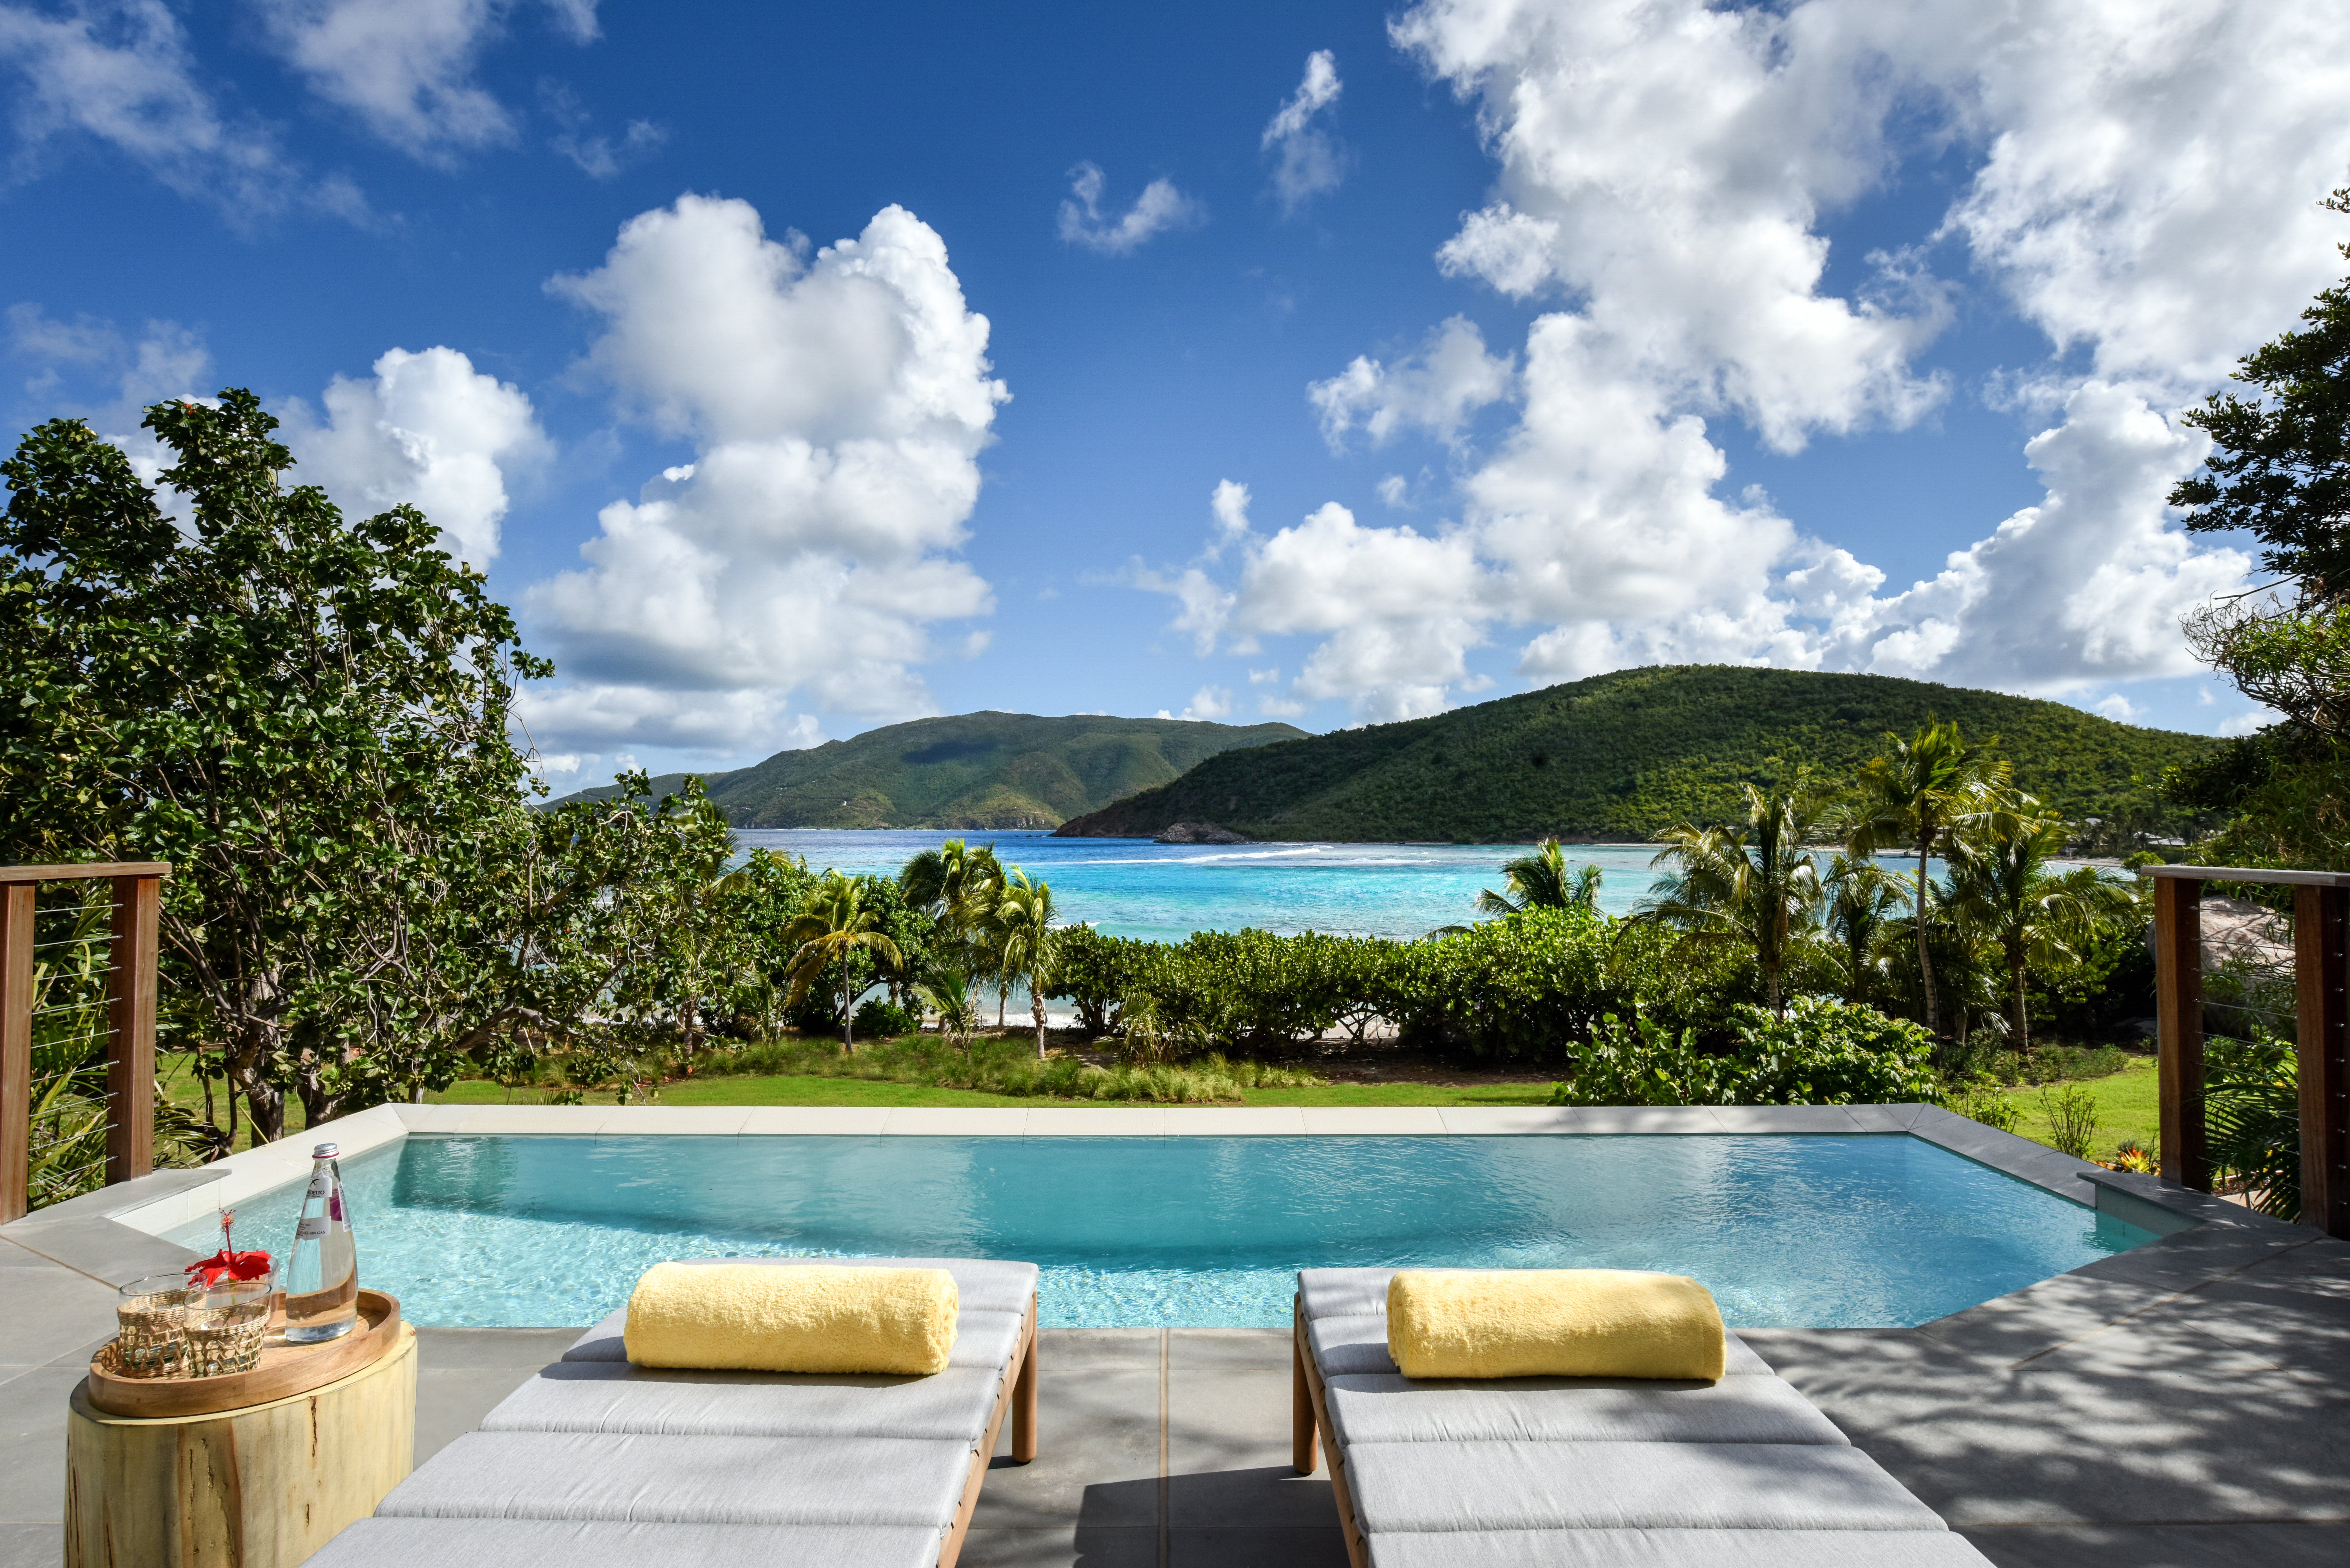 Enjoy some secluded luxury at the Rosewood Little Dix Bay in the British Virgin Islands